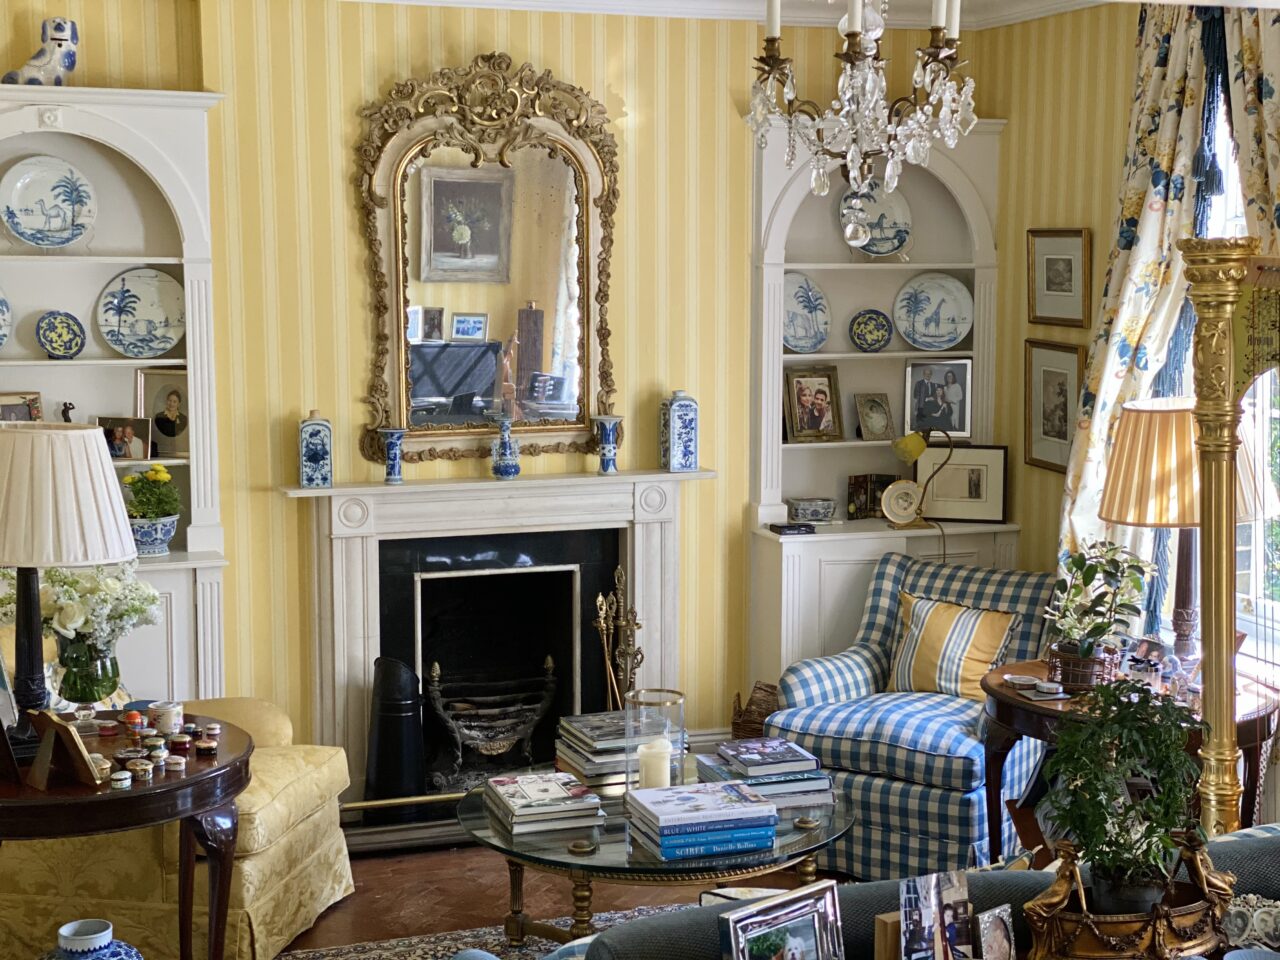 Relevance of English Country Decor: Why It Is Still Fashionable